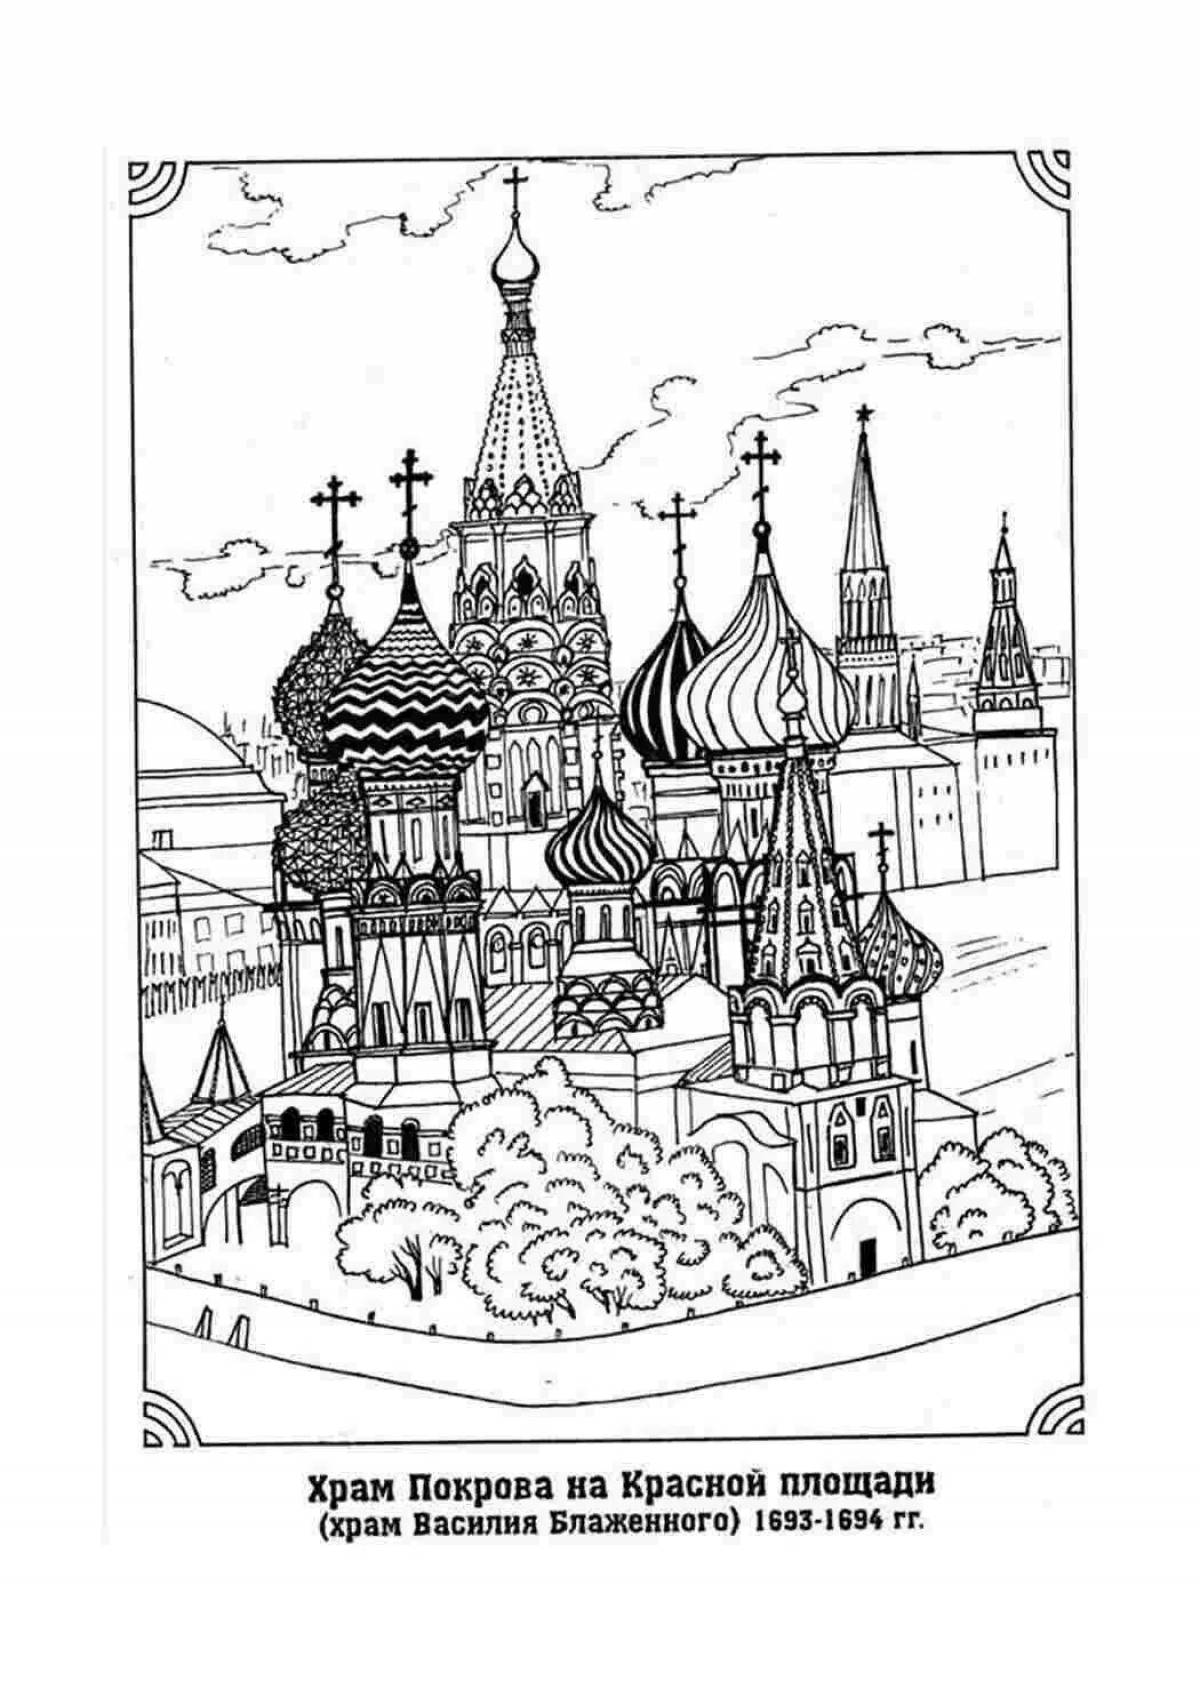 Awesome Moscow Kremlin coloring book for kids